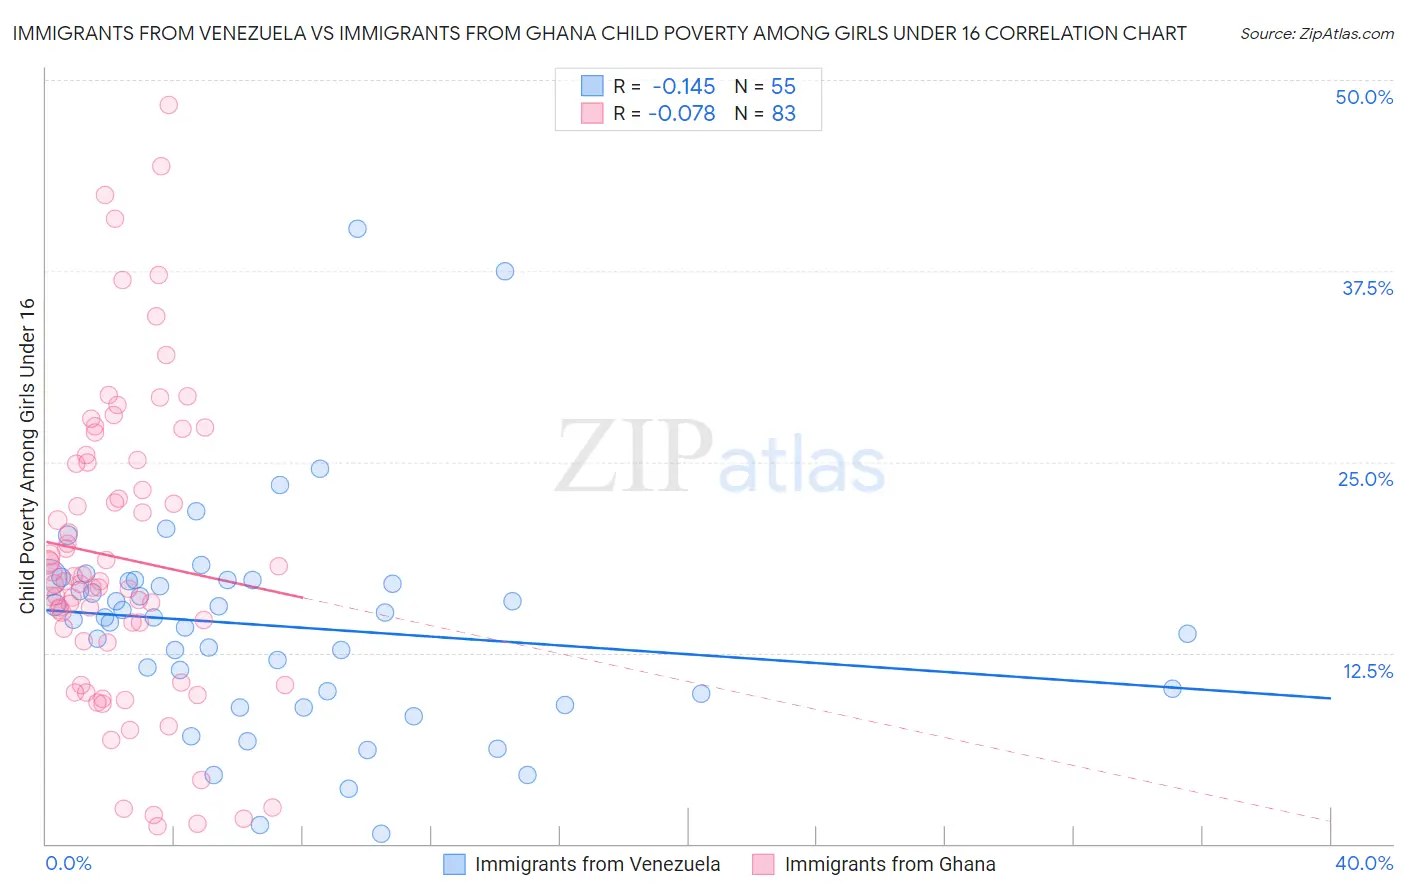 Immigrants from Venezuela vs Immigrants from Ghana Child Poverty Among Girls Under 16